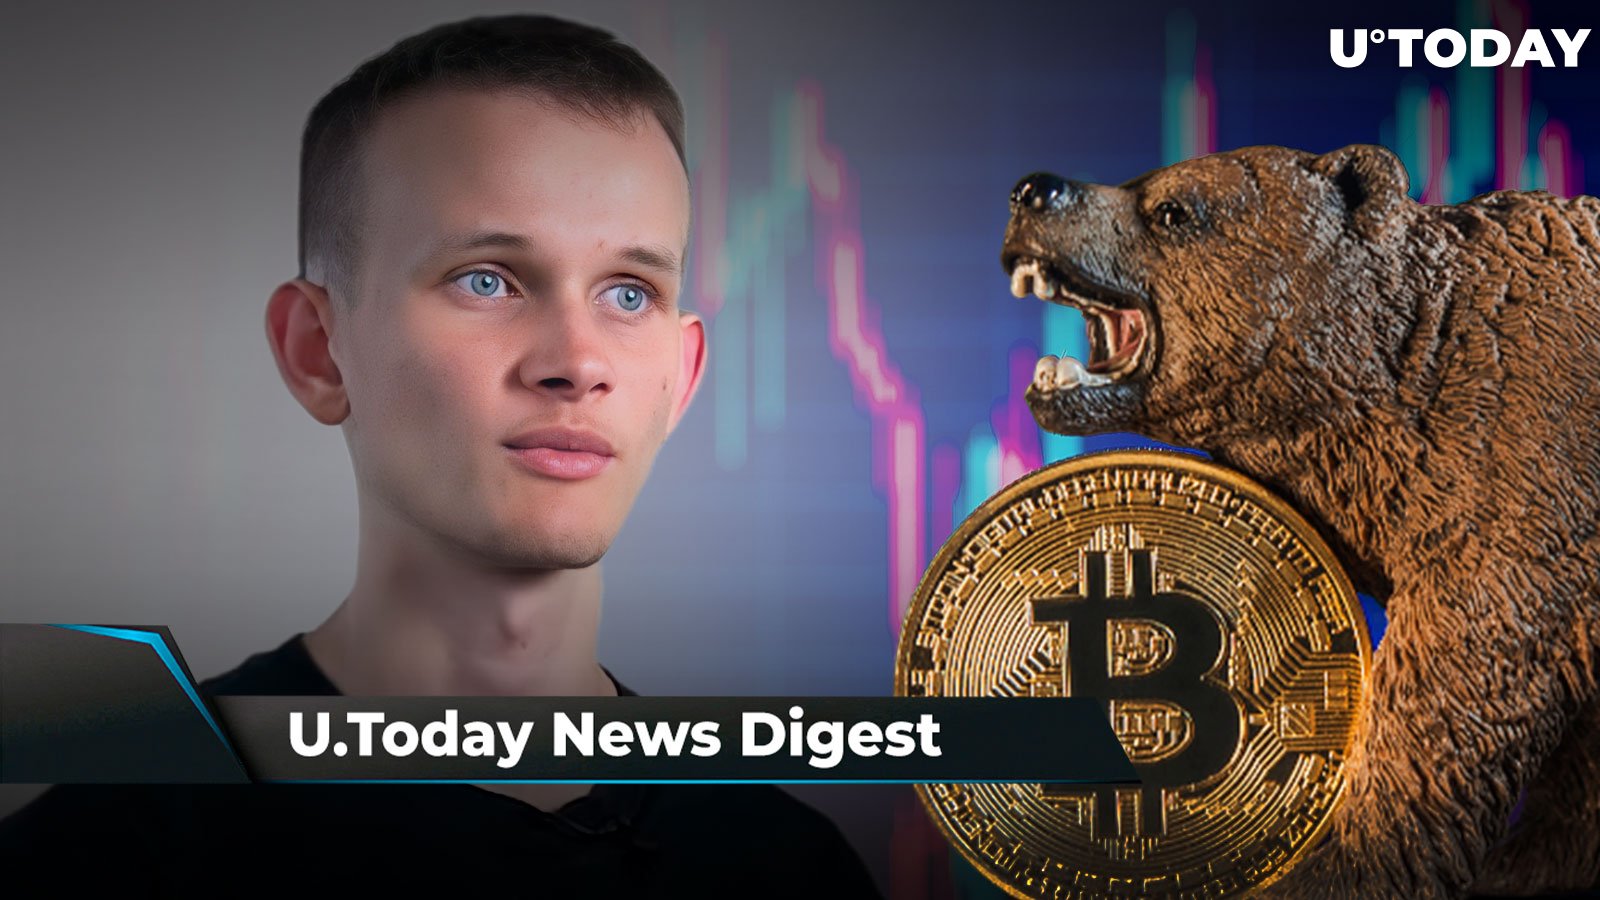 New Meme Token “Supported” by Vitalik Buterin, BabyDoge Surges on New Listing, Here’s Why This BTC Bear Market Is Different: Crypto News Digest by U.Today